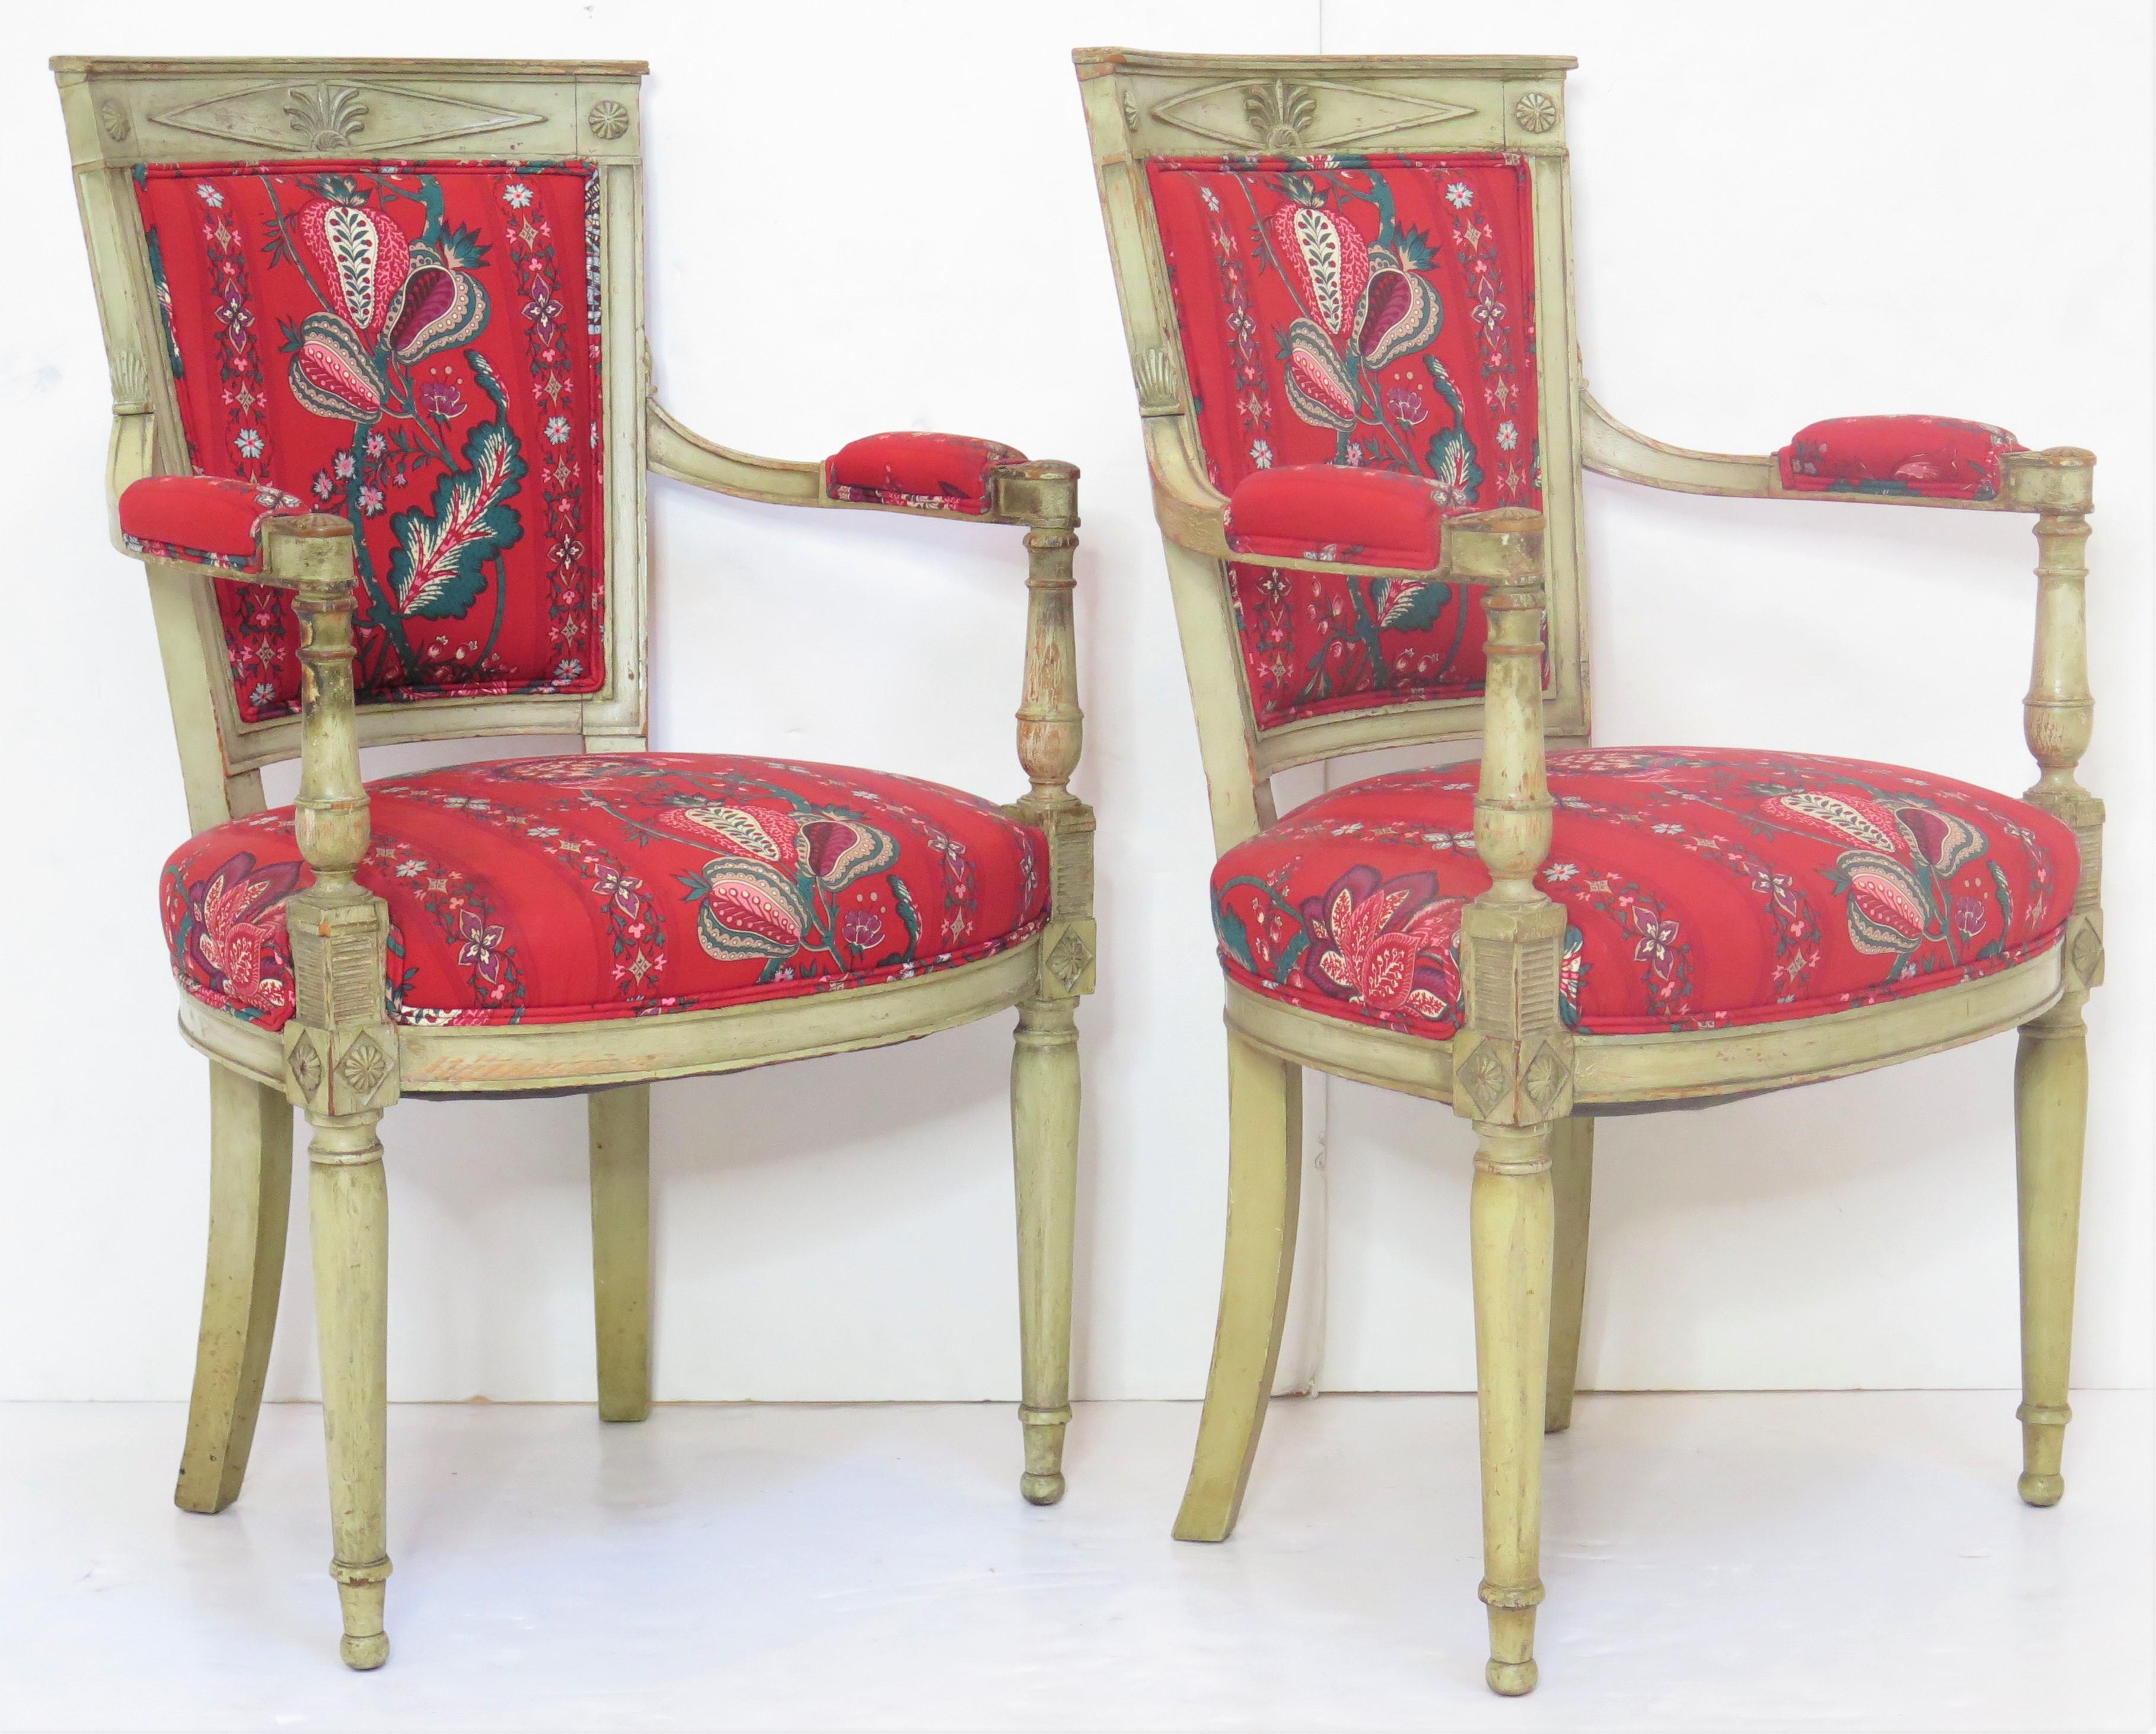 a pair of handsome French Directoire-style fauteuils with painted frames in off white or cream, carved anthemion and rosettes decoration, turned tapered front legs, upholstered seat, back, and arm rests, great vintage fabric in bright red 